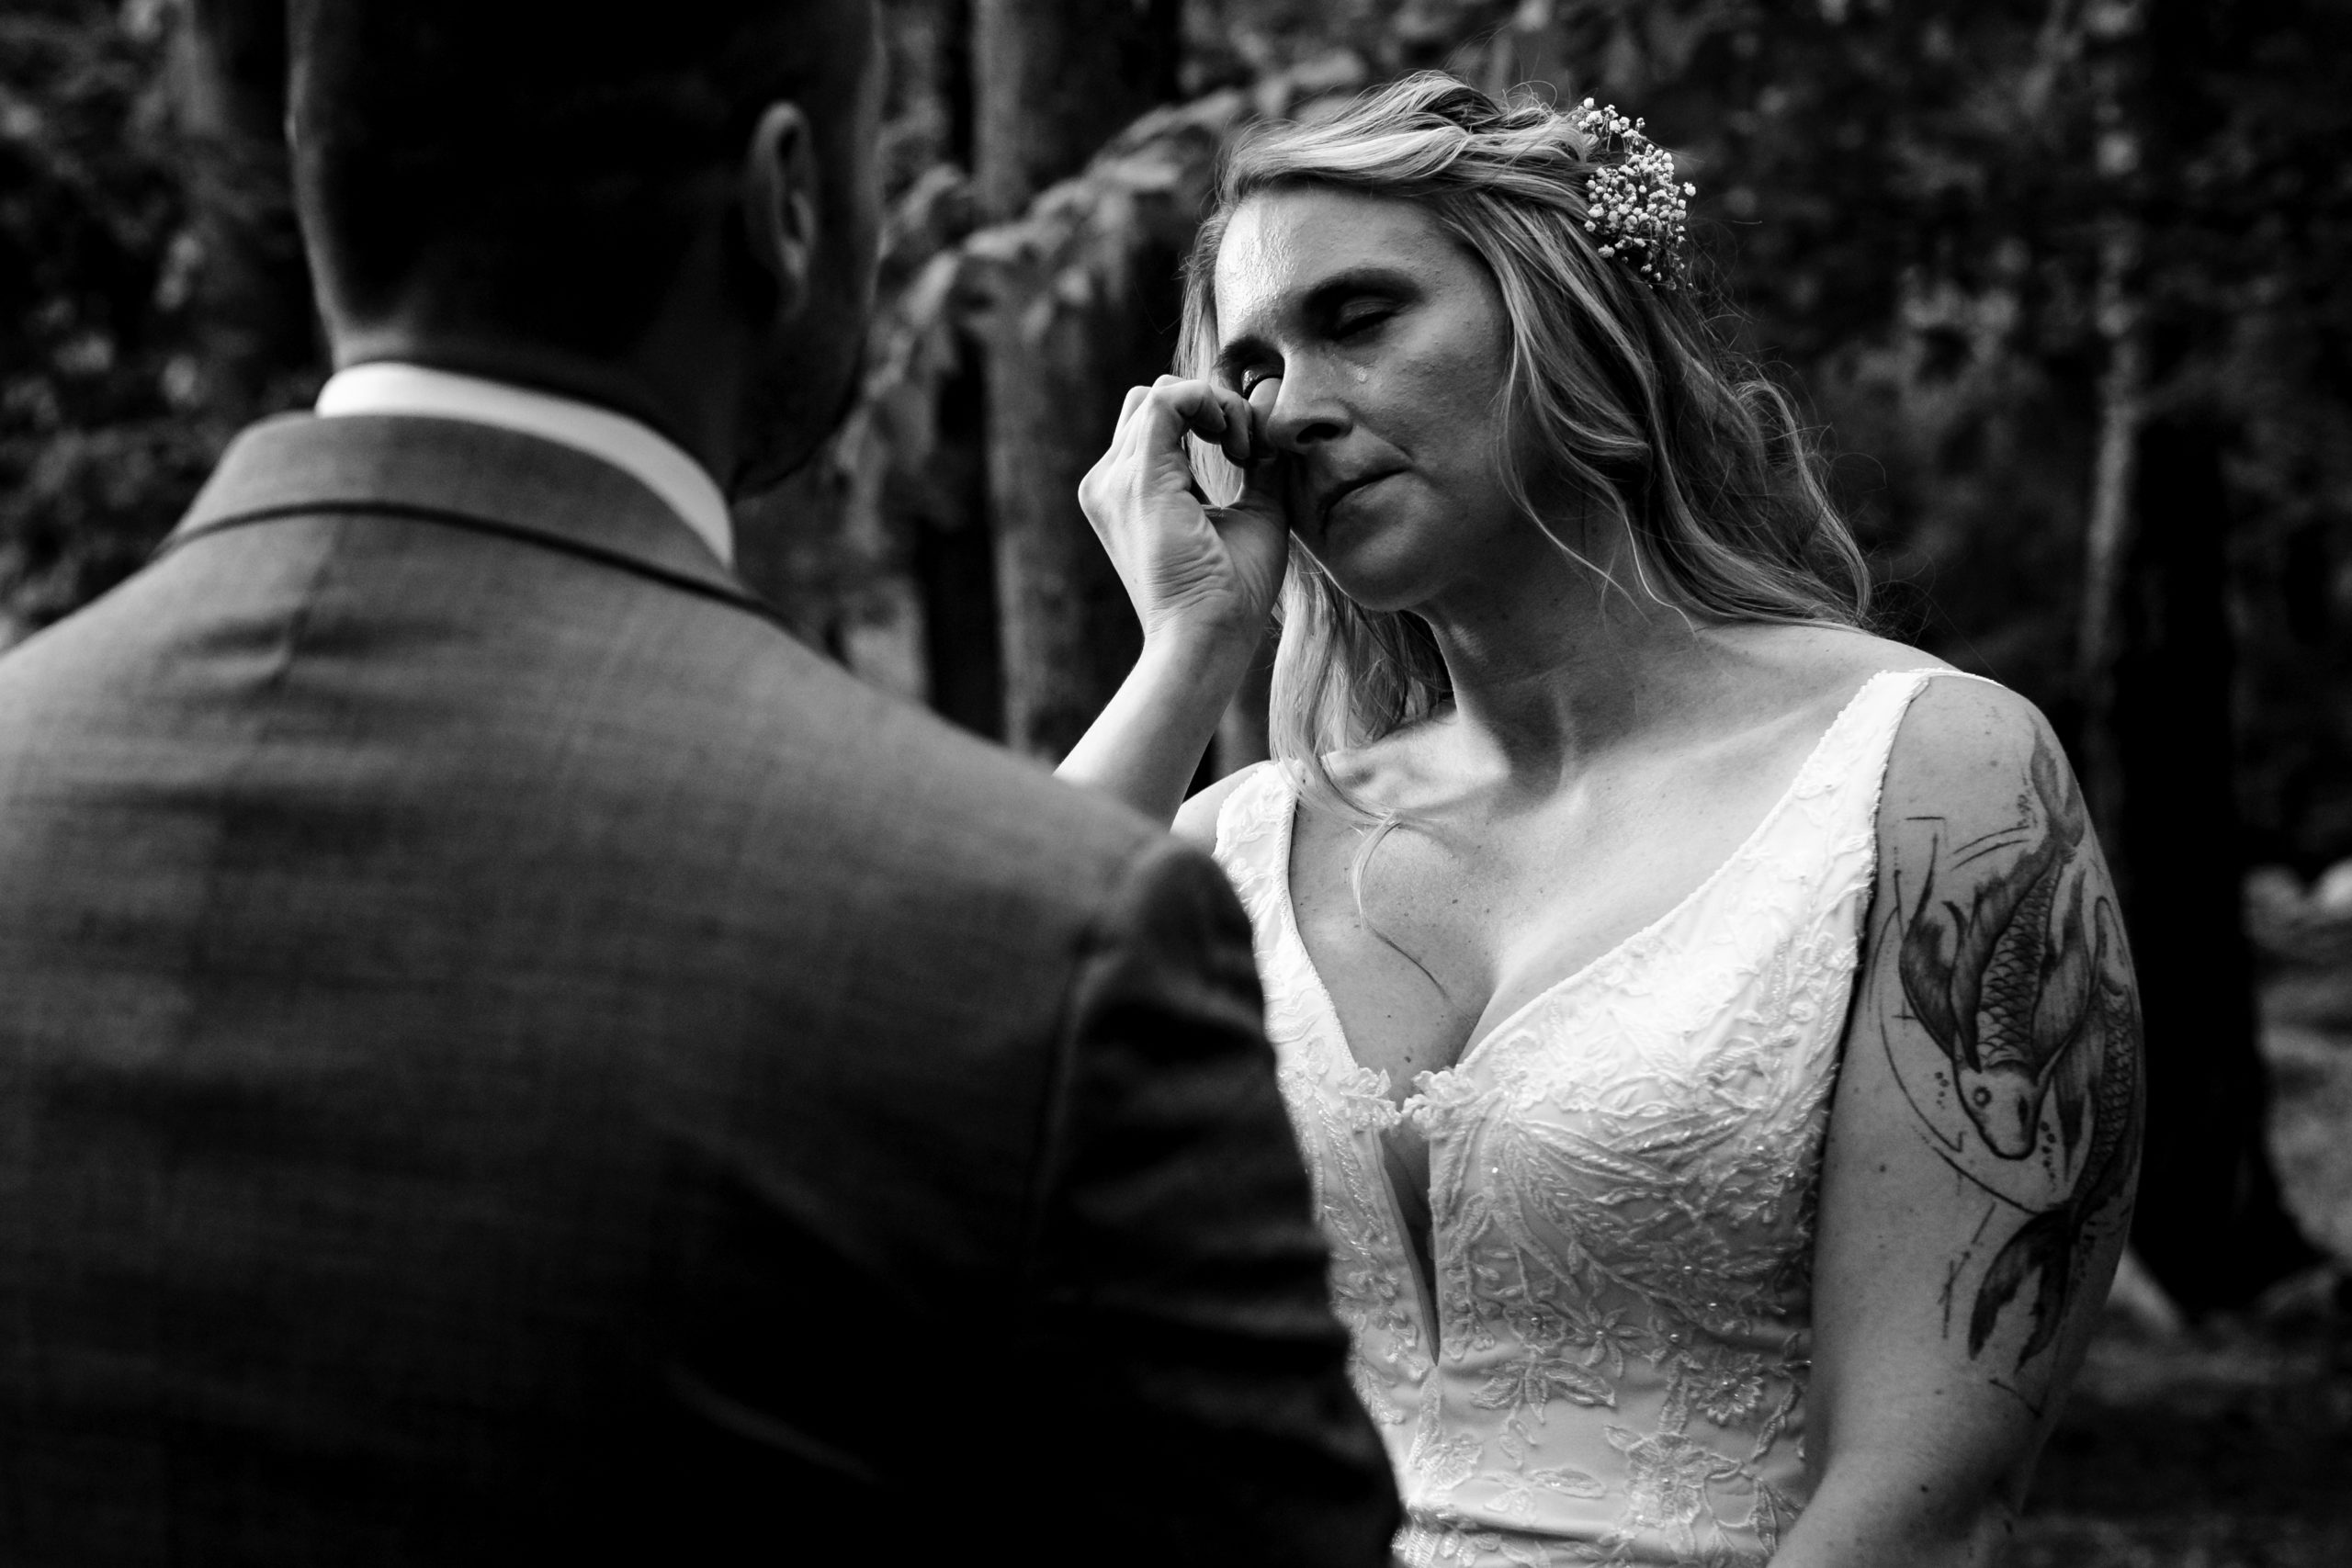 Tearful wedding ceremony in the woods of Maine